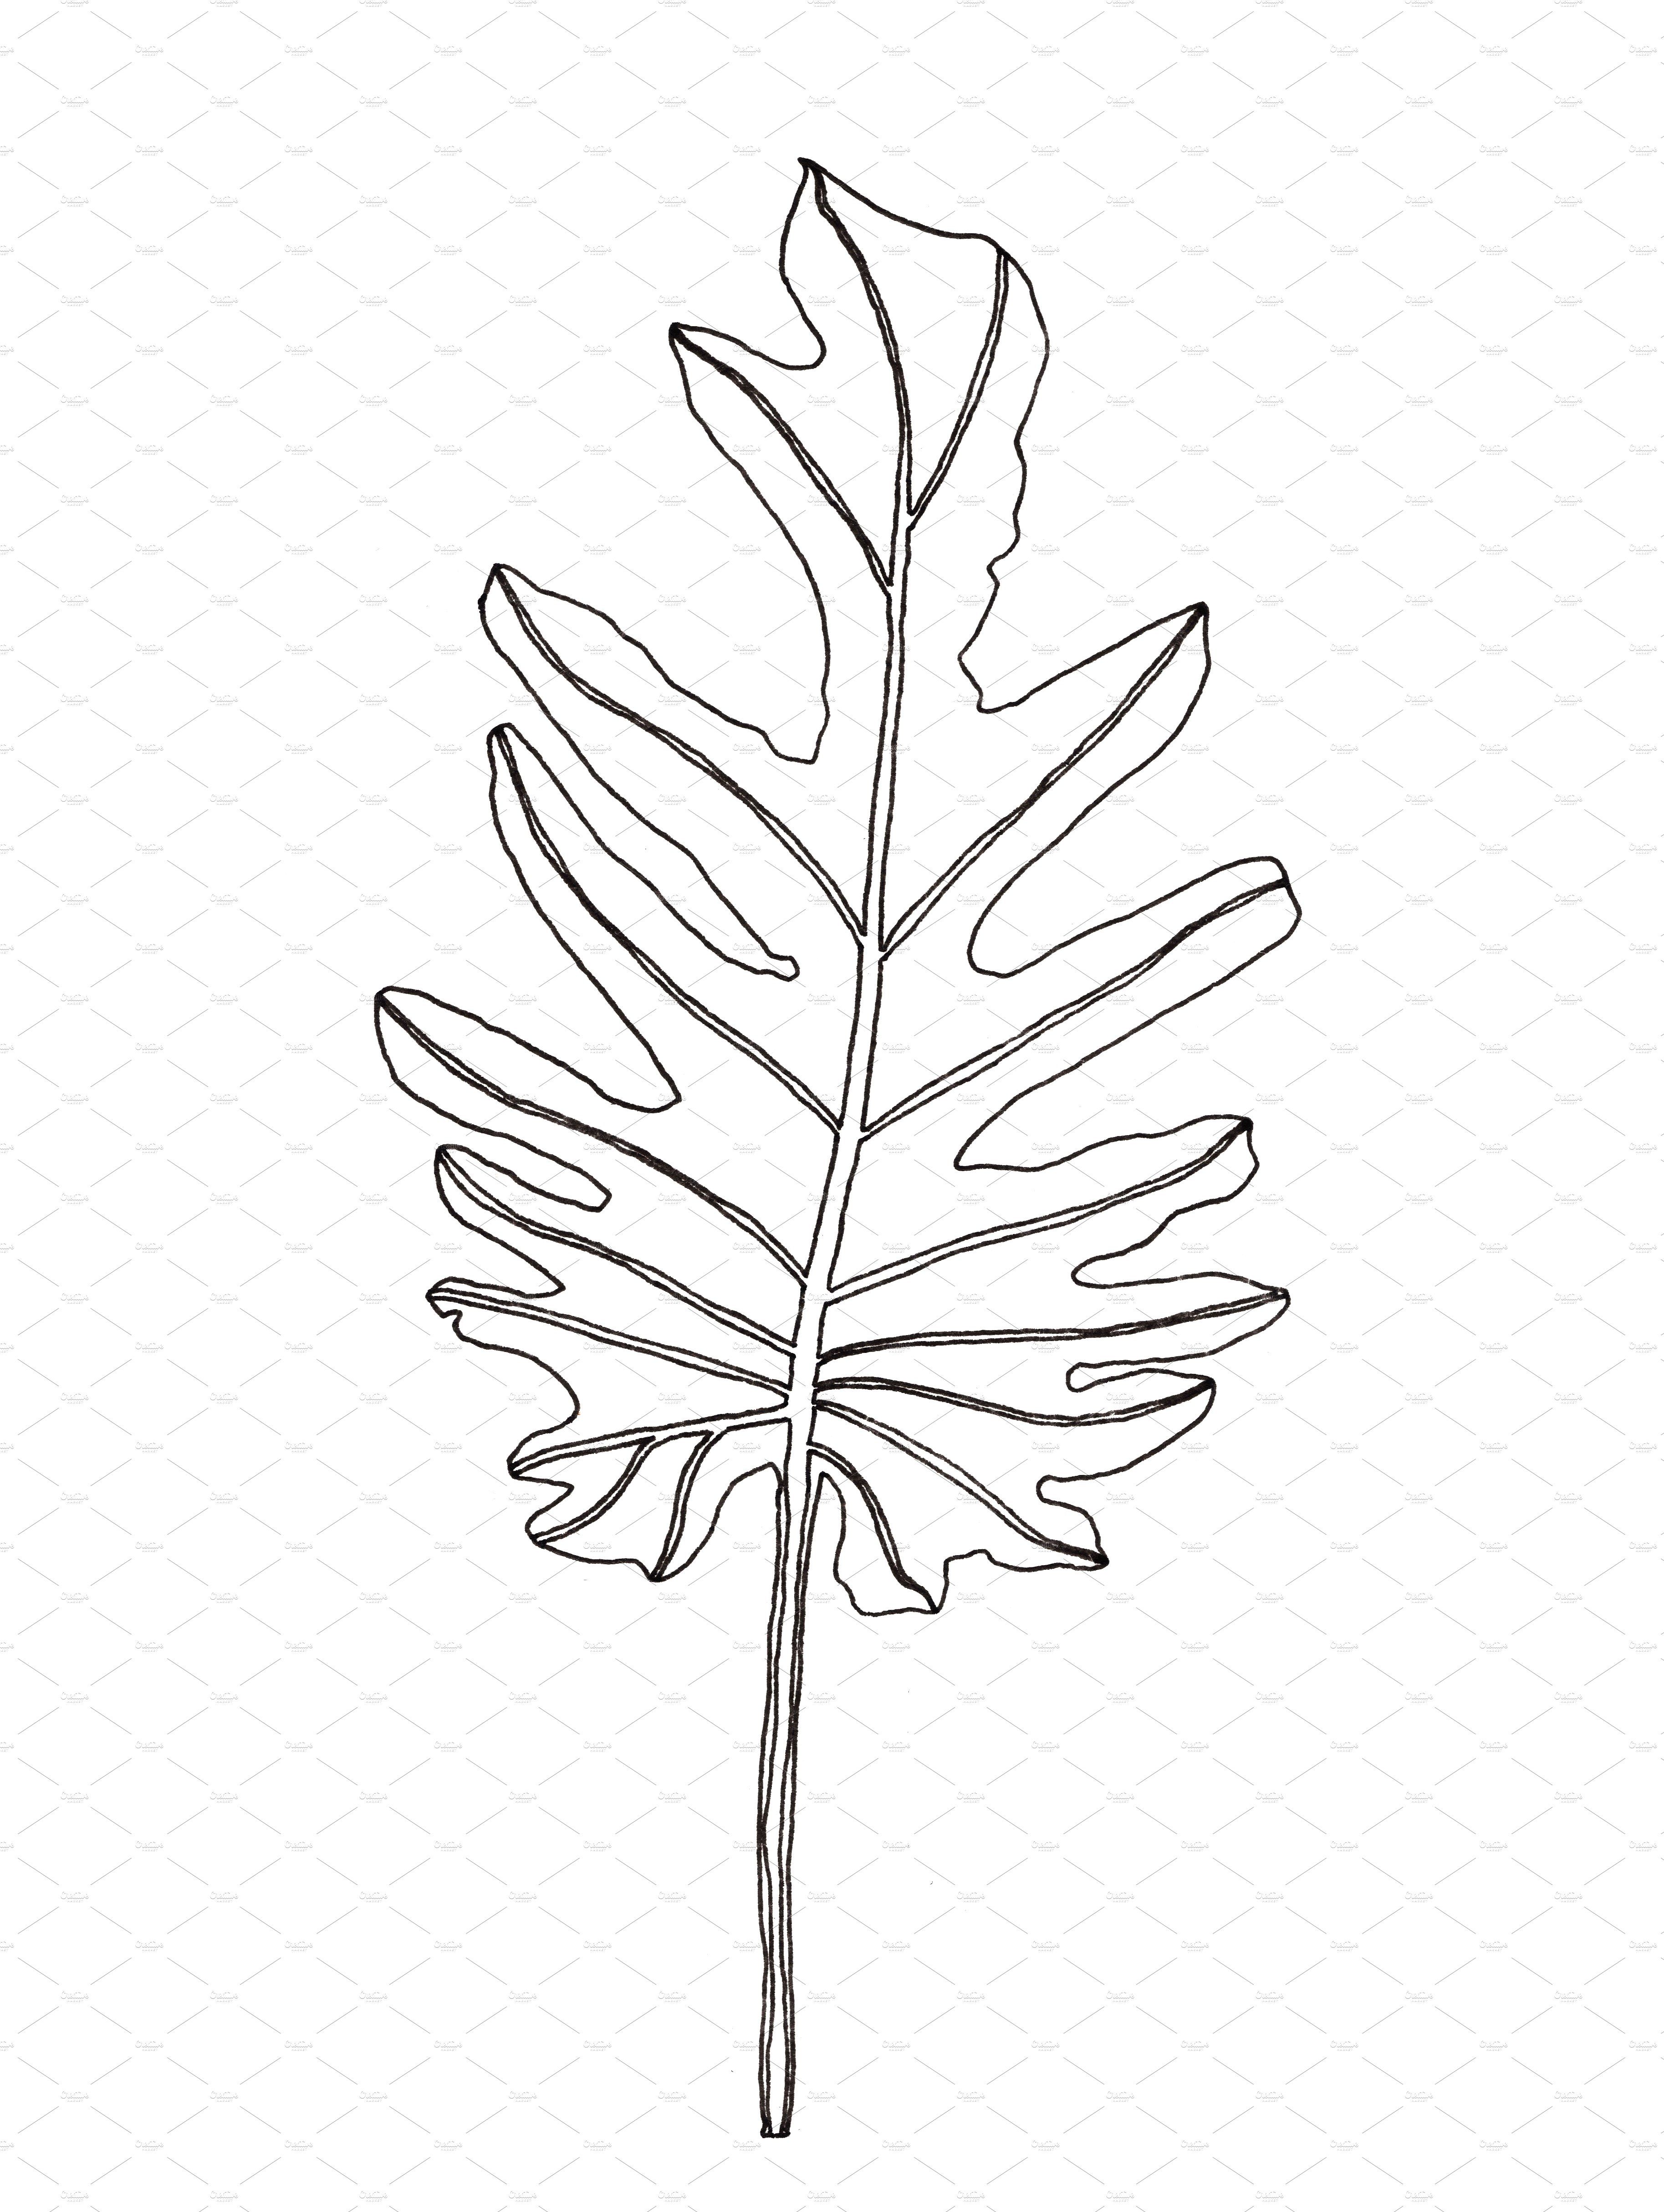 Palm leaves clipart.